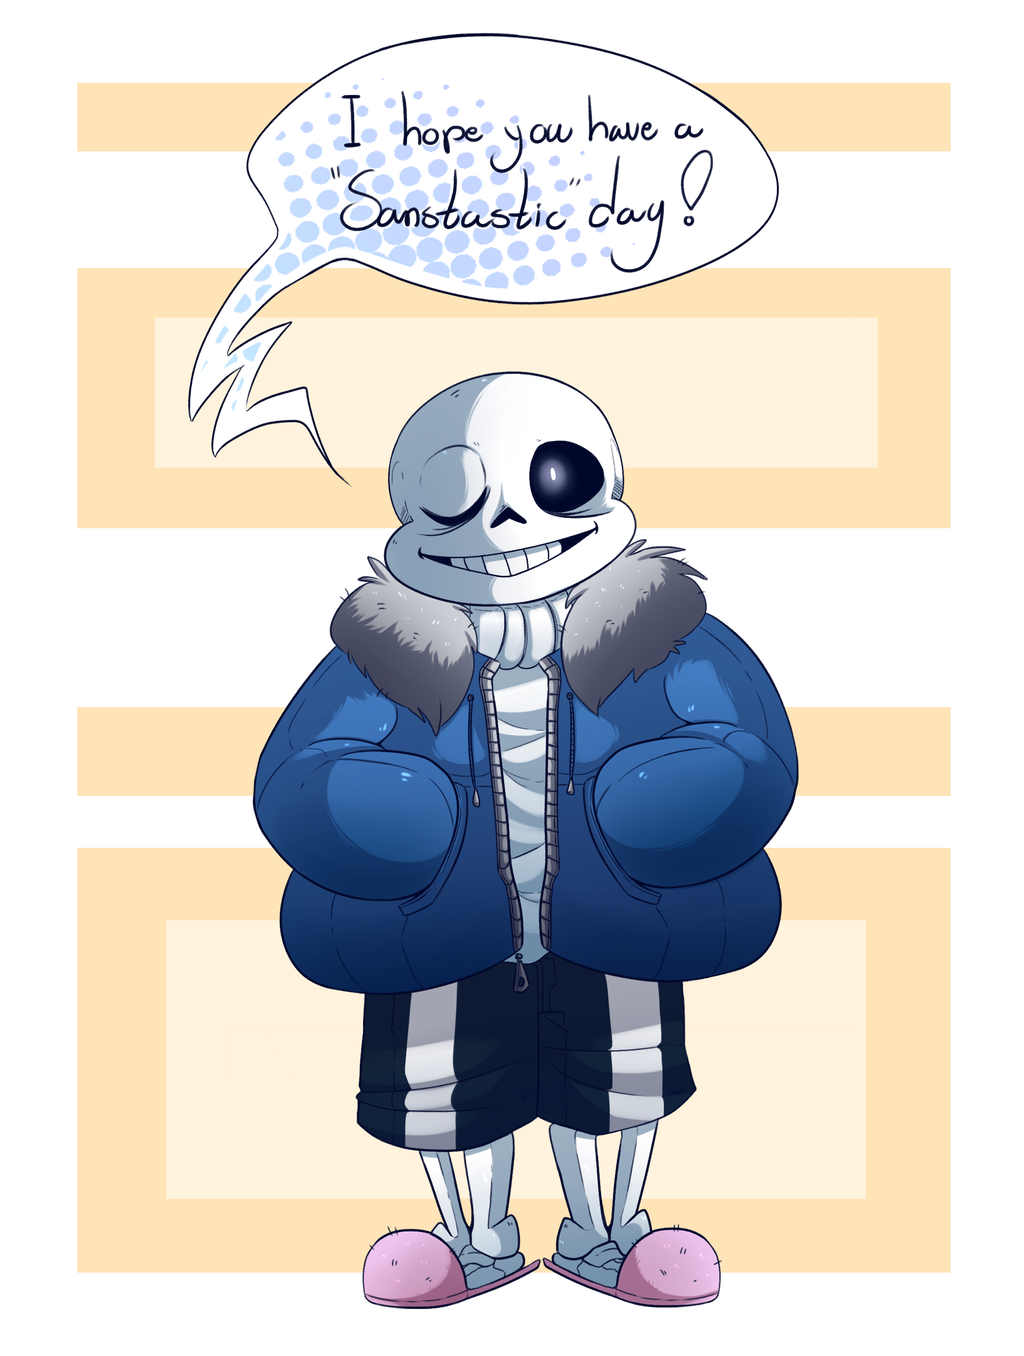 Have a sanstastic day! by Renic-Pai on DeviantArt